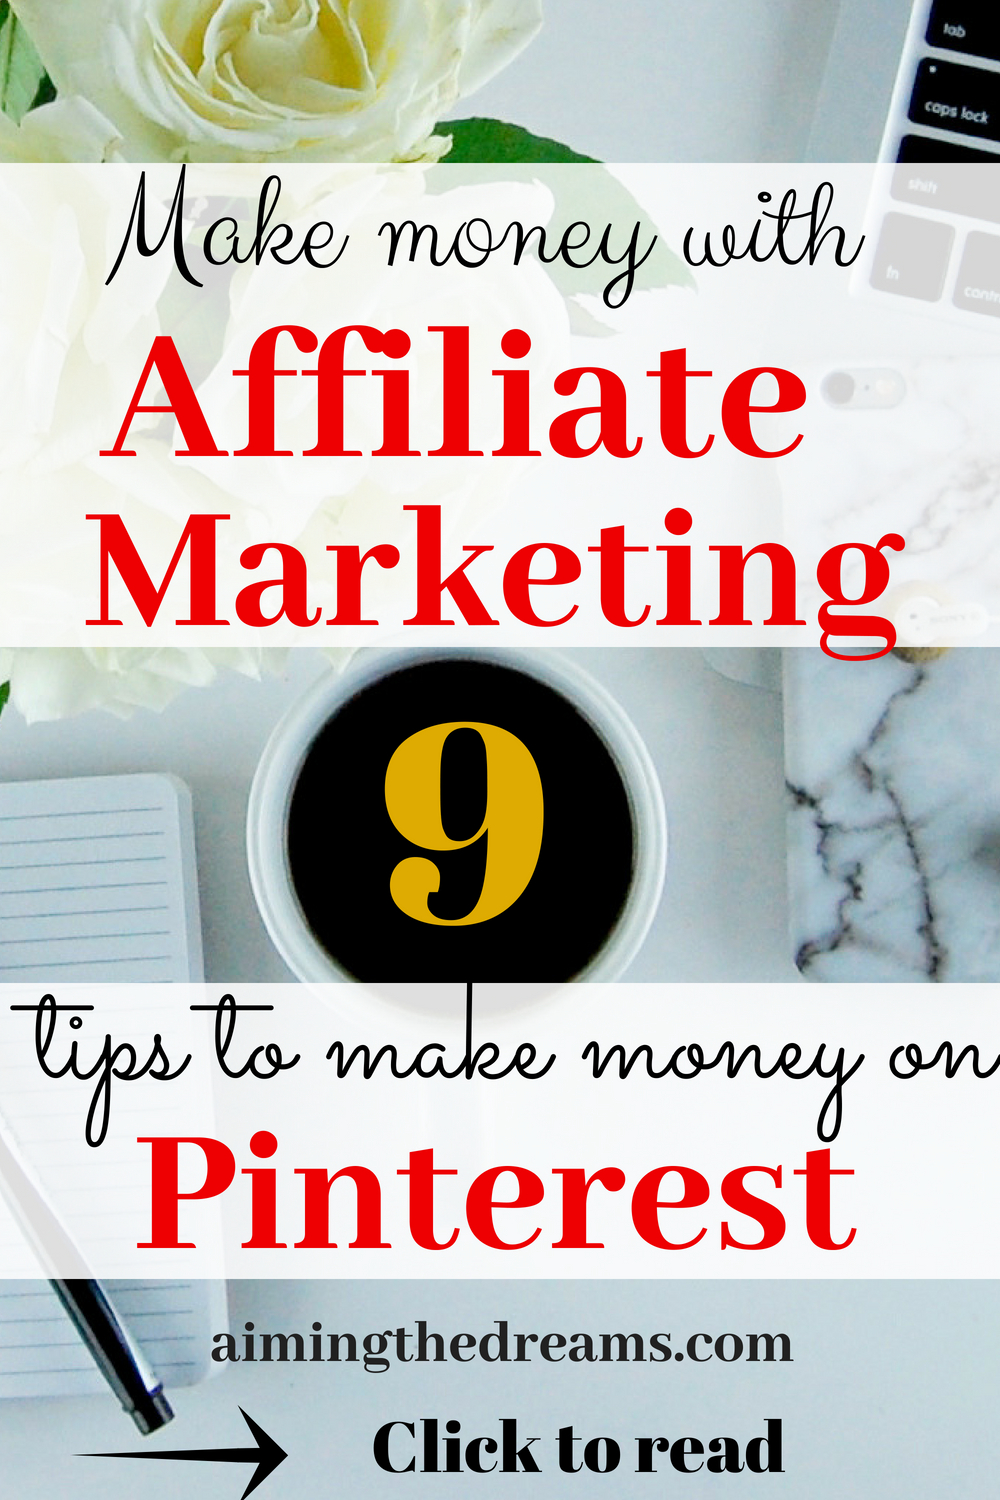 Tips to make with money with affilliate marketing on pinterest. Everybody loves passive income and it is good for stay at home mums. Click to read